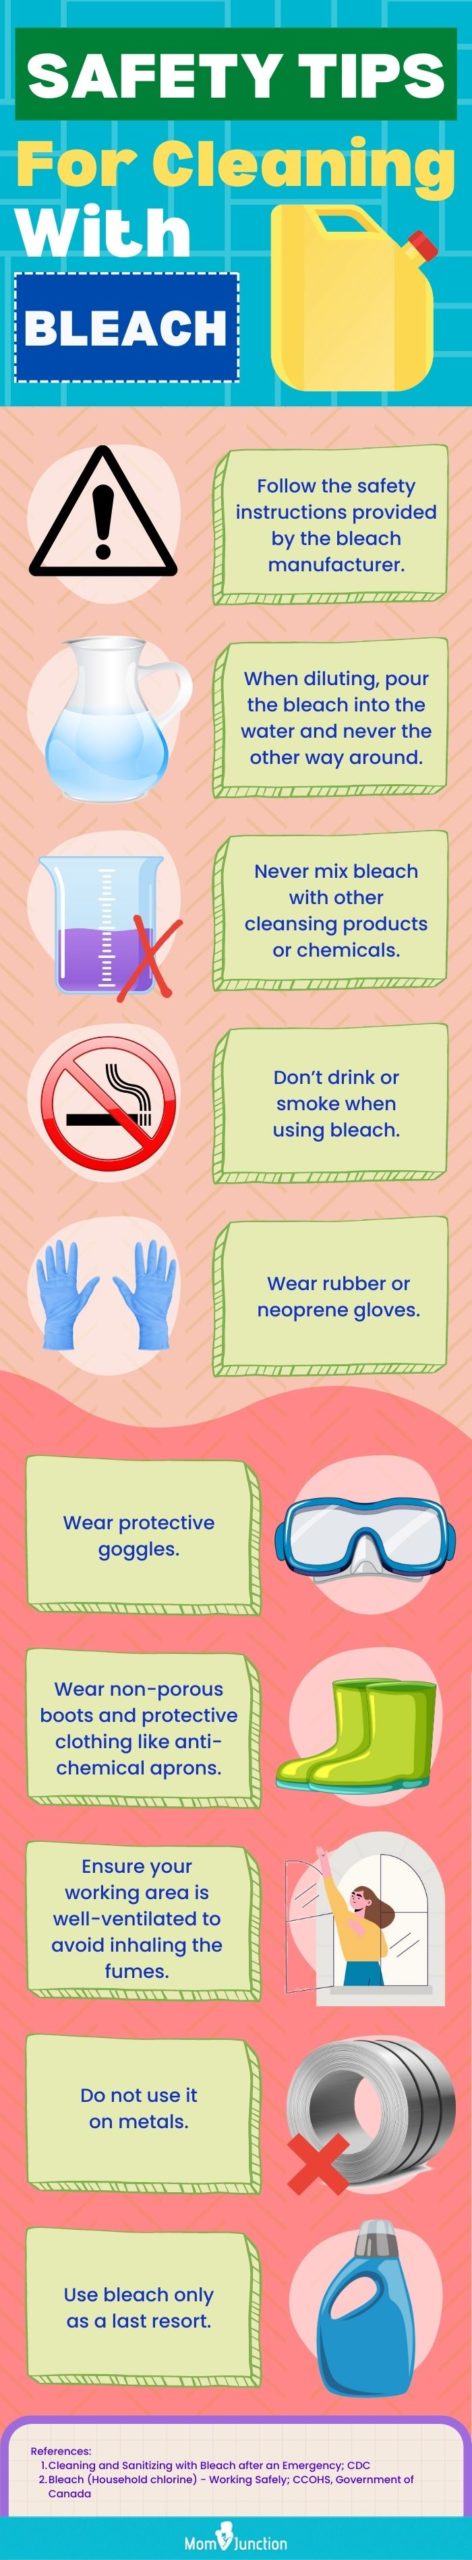 Safety Tips For Cleaning With Bleach (infographic)